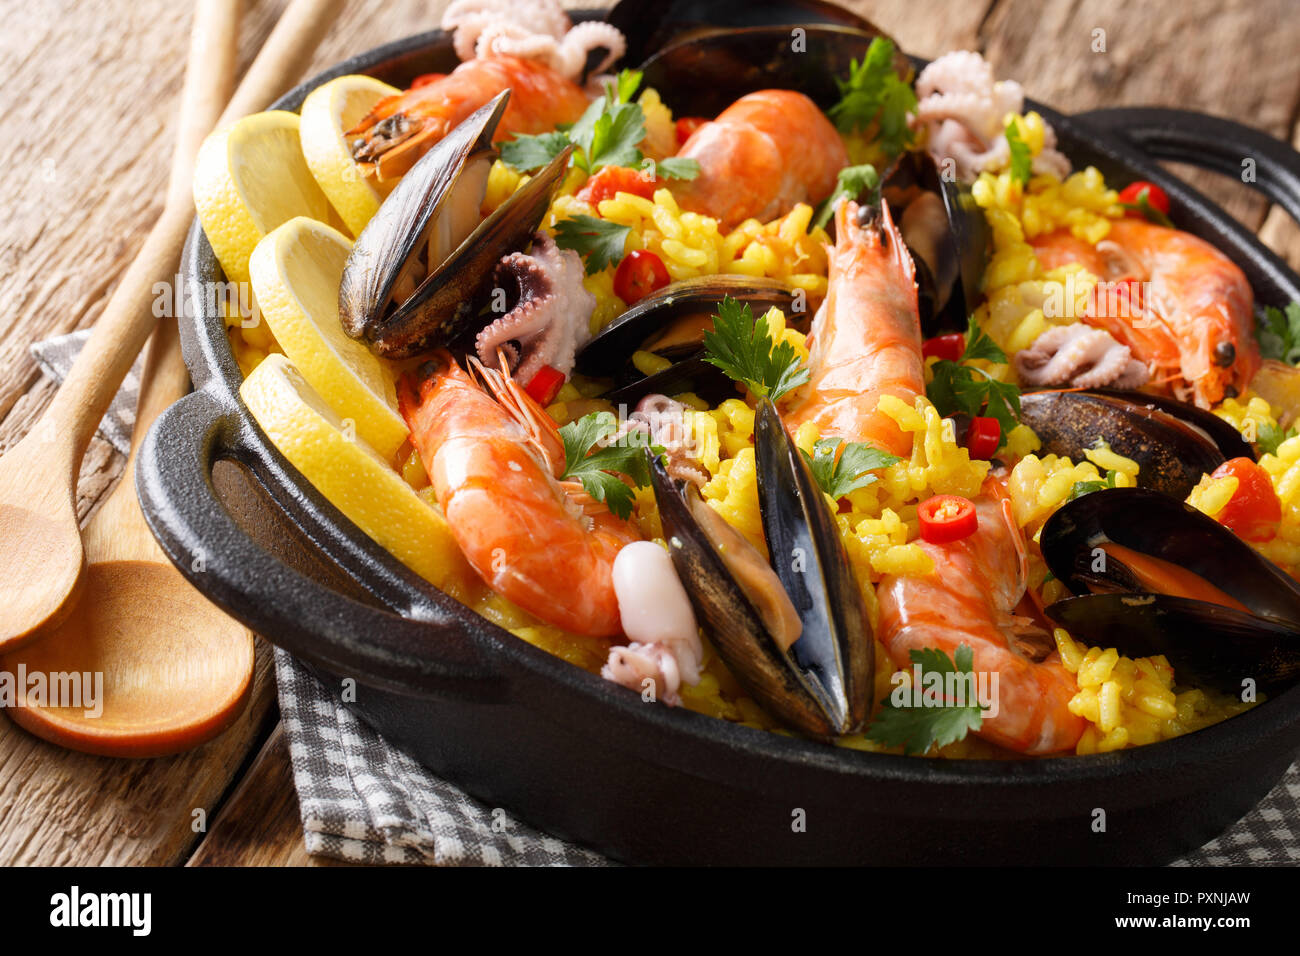 Spanish traditional cuisine: hot paella with seafood shrimps, mussels, fish, and baby octopuses close-up in a frying pan on the table. horizontal Stock Photo